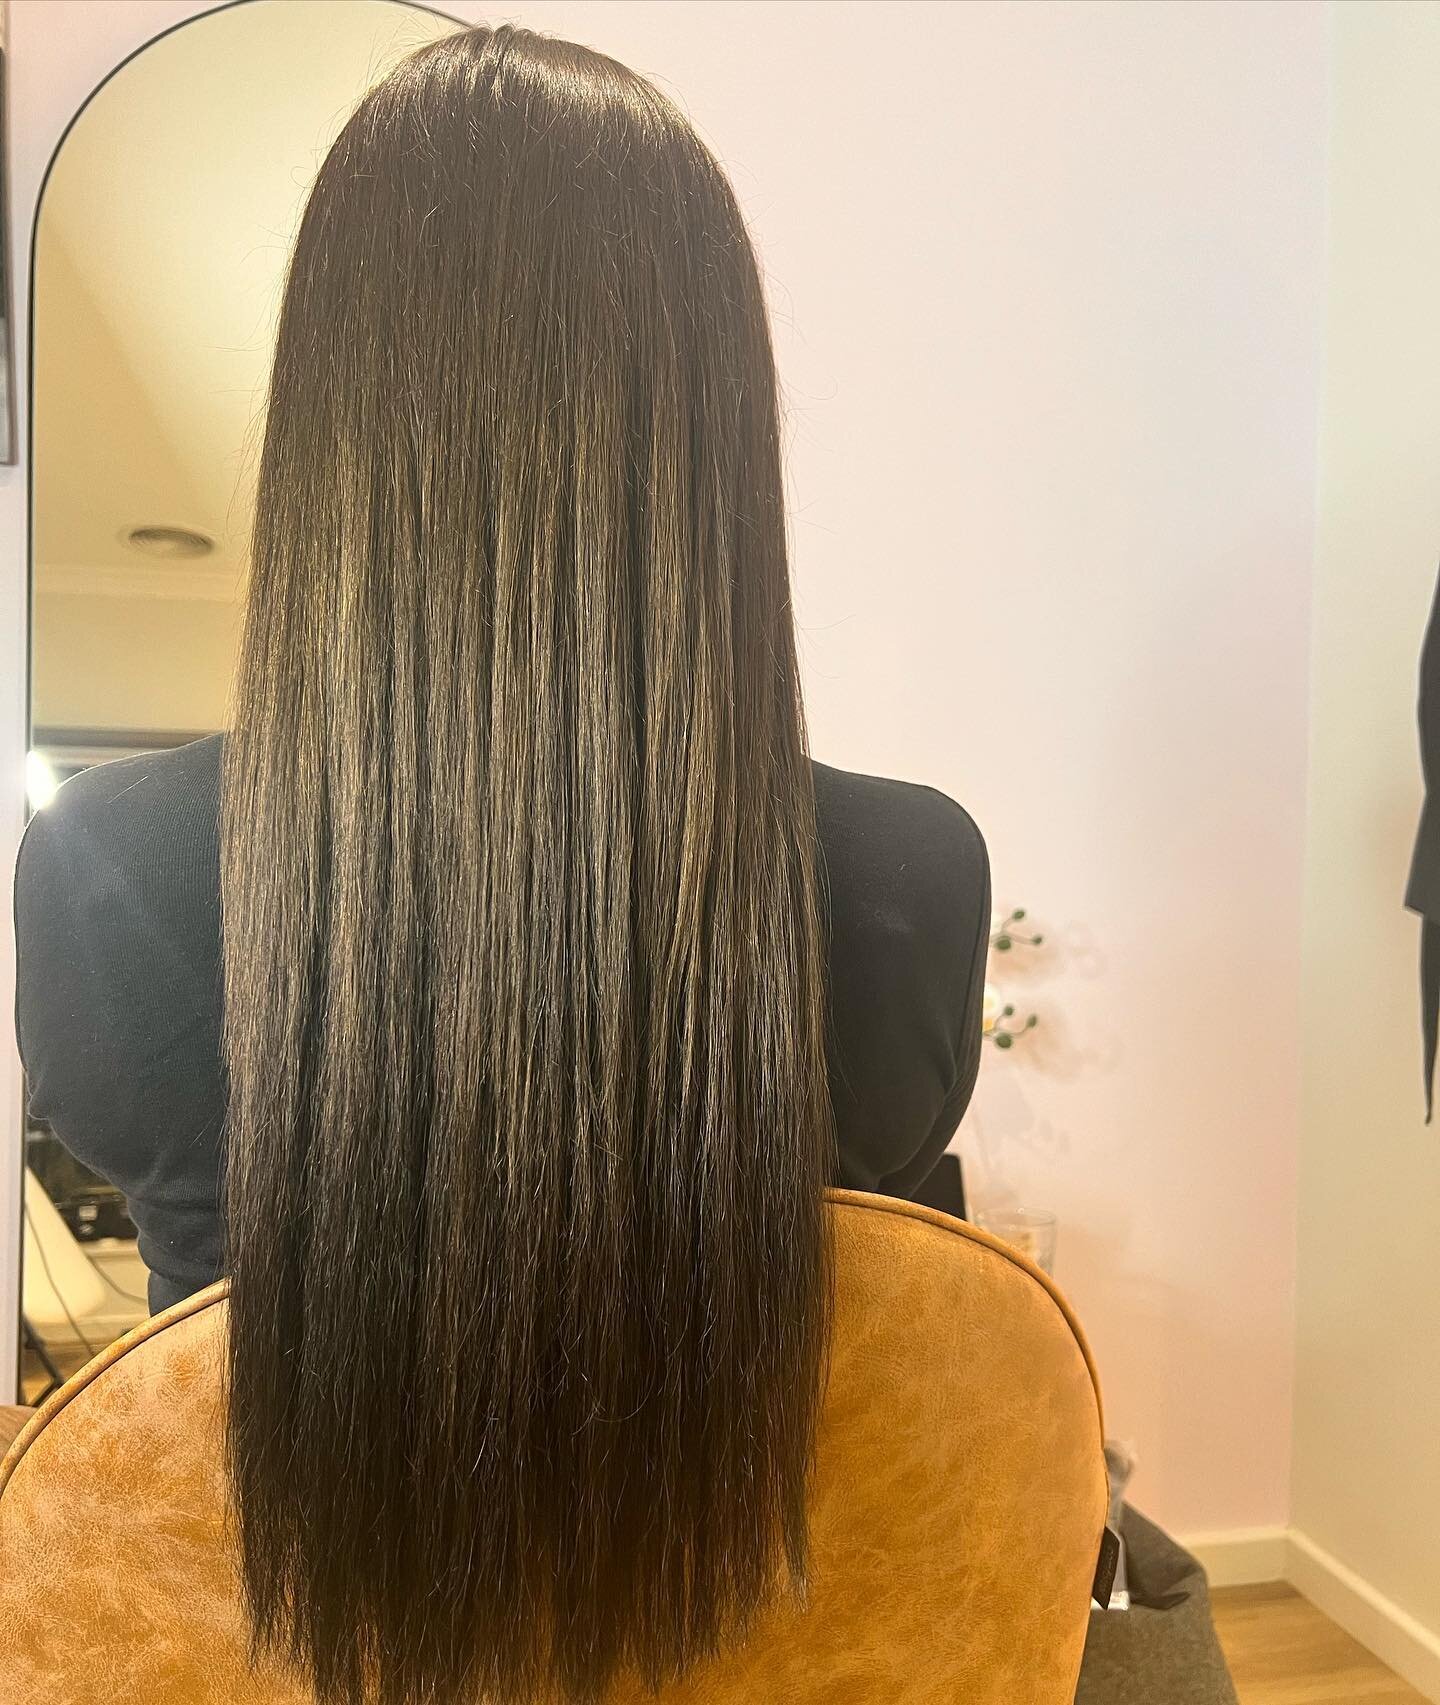 The ultimate Hair transformation
#hairextensions #hairextensionspecialist #pearlmane #pearlmanehair #pearlmanehairextensions #longhair #weft #weftextensions #flatweft #flatweftextensions #invisablehairextensions #undetectablehairextensions #blondehai